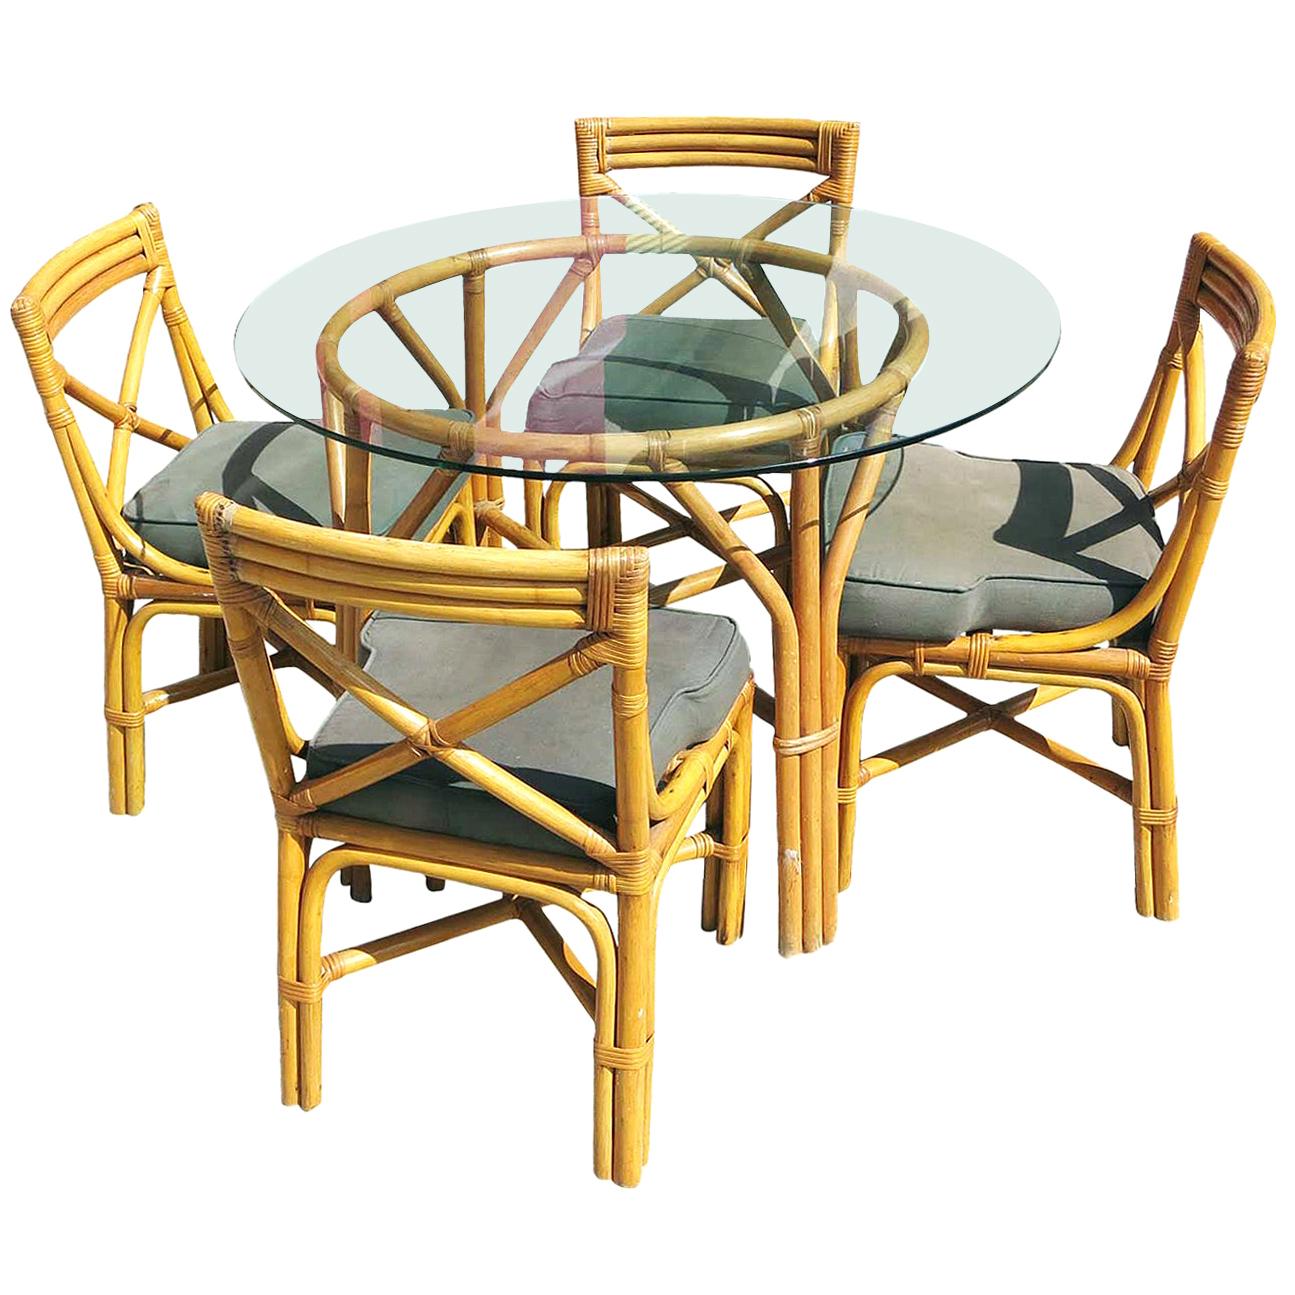 Restored Midcentury Rattan Table with Chairs Dining Set